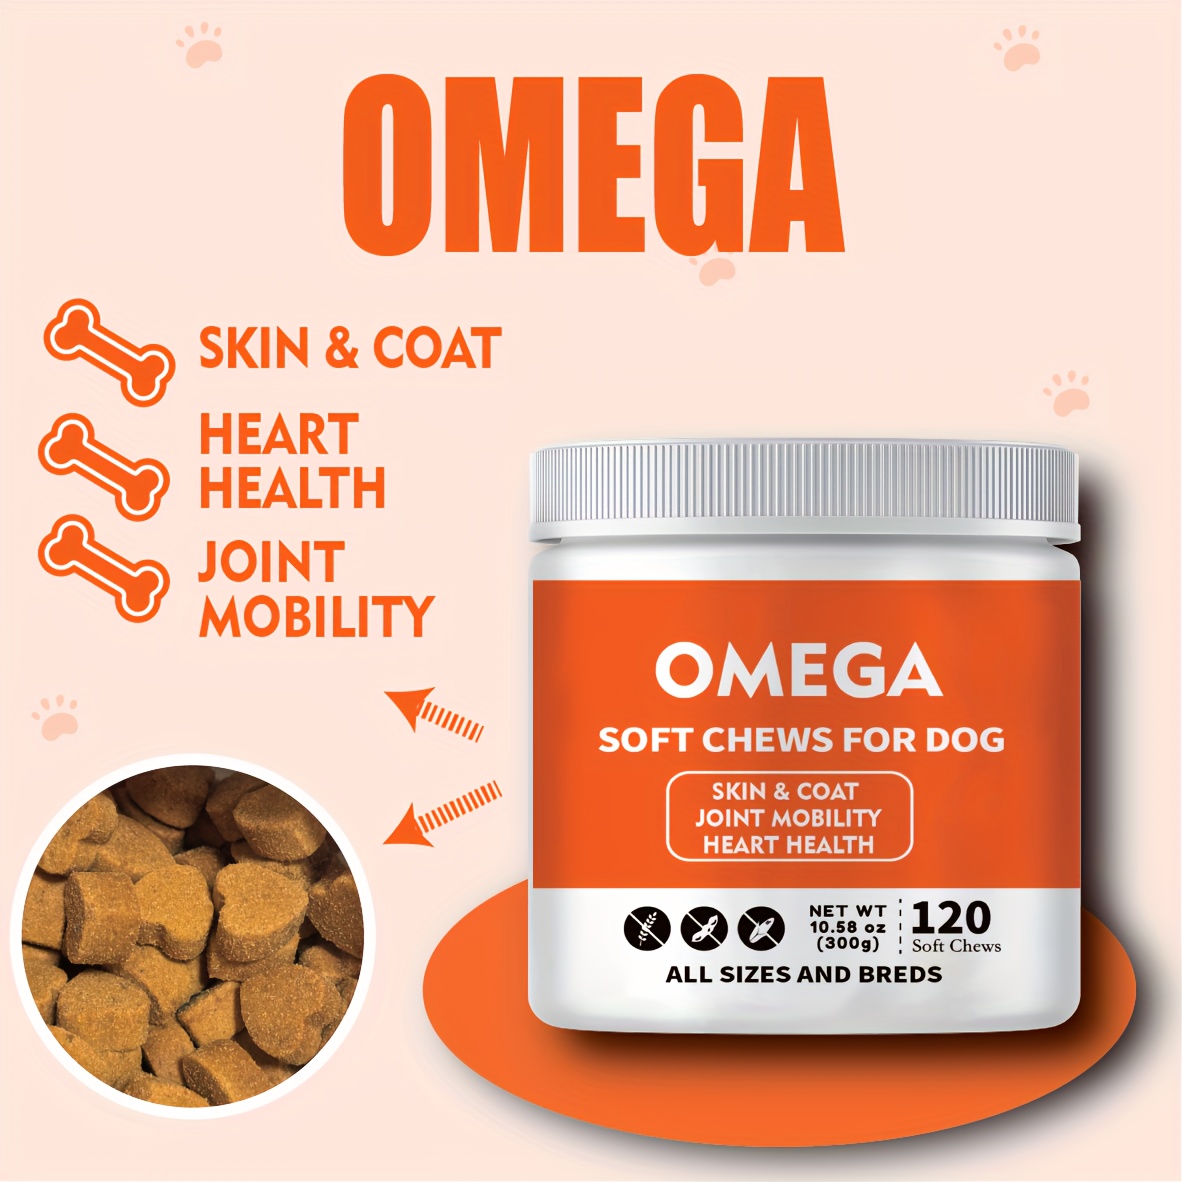 Omega 3 Fish Oil for Dogs - Better Than Salmon Oil for Dogs - Dog Fish Oil  Supplement for Shedding, Allergy, Itch Relief - Supports Dry Skin, Joints 